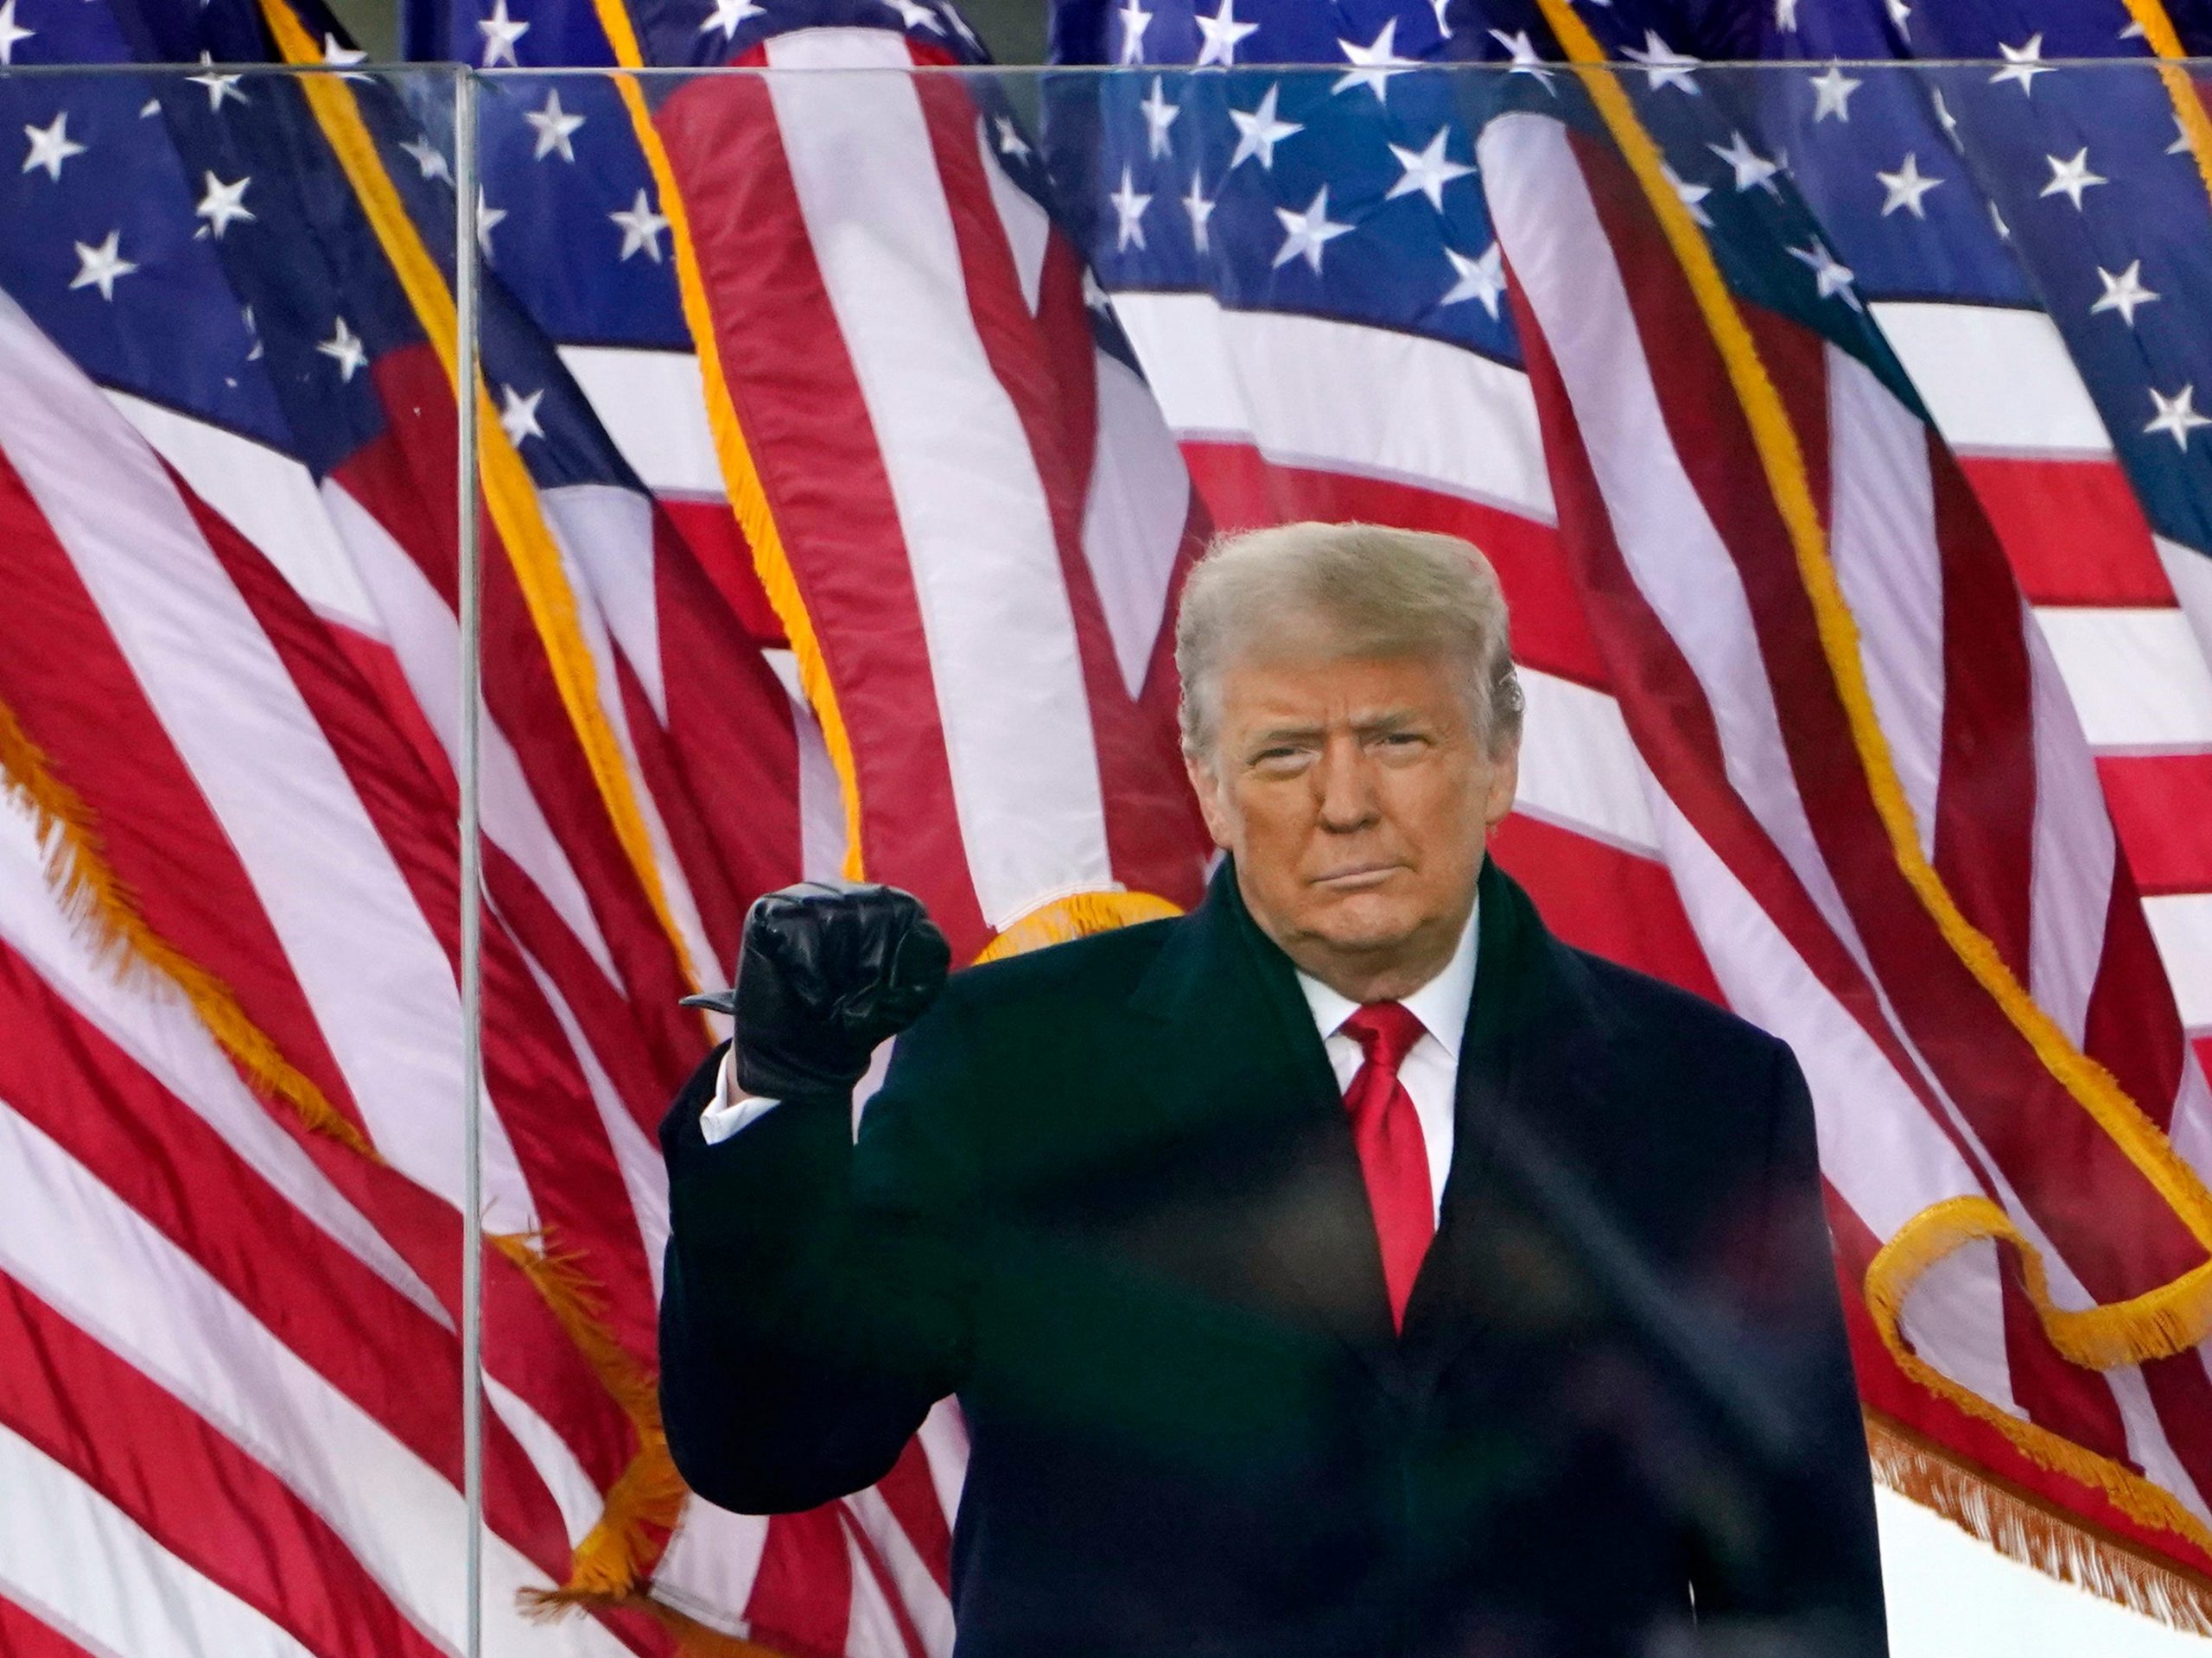 Donald Trump speaking in front of American flags